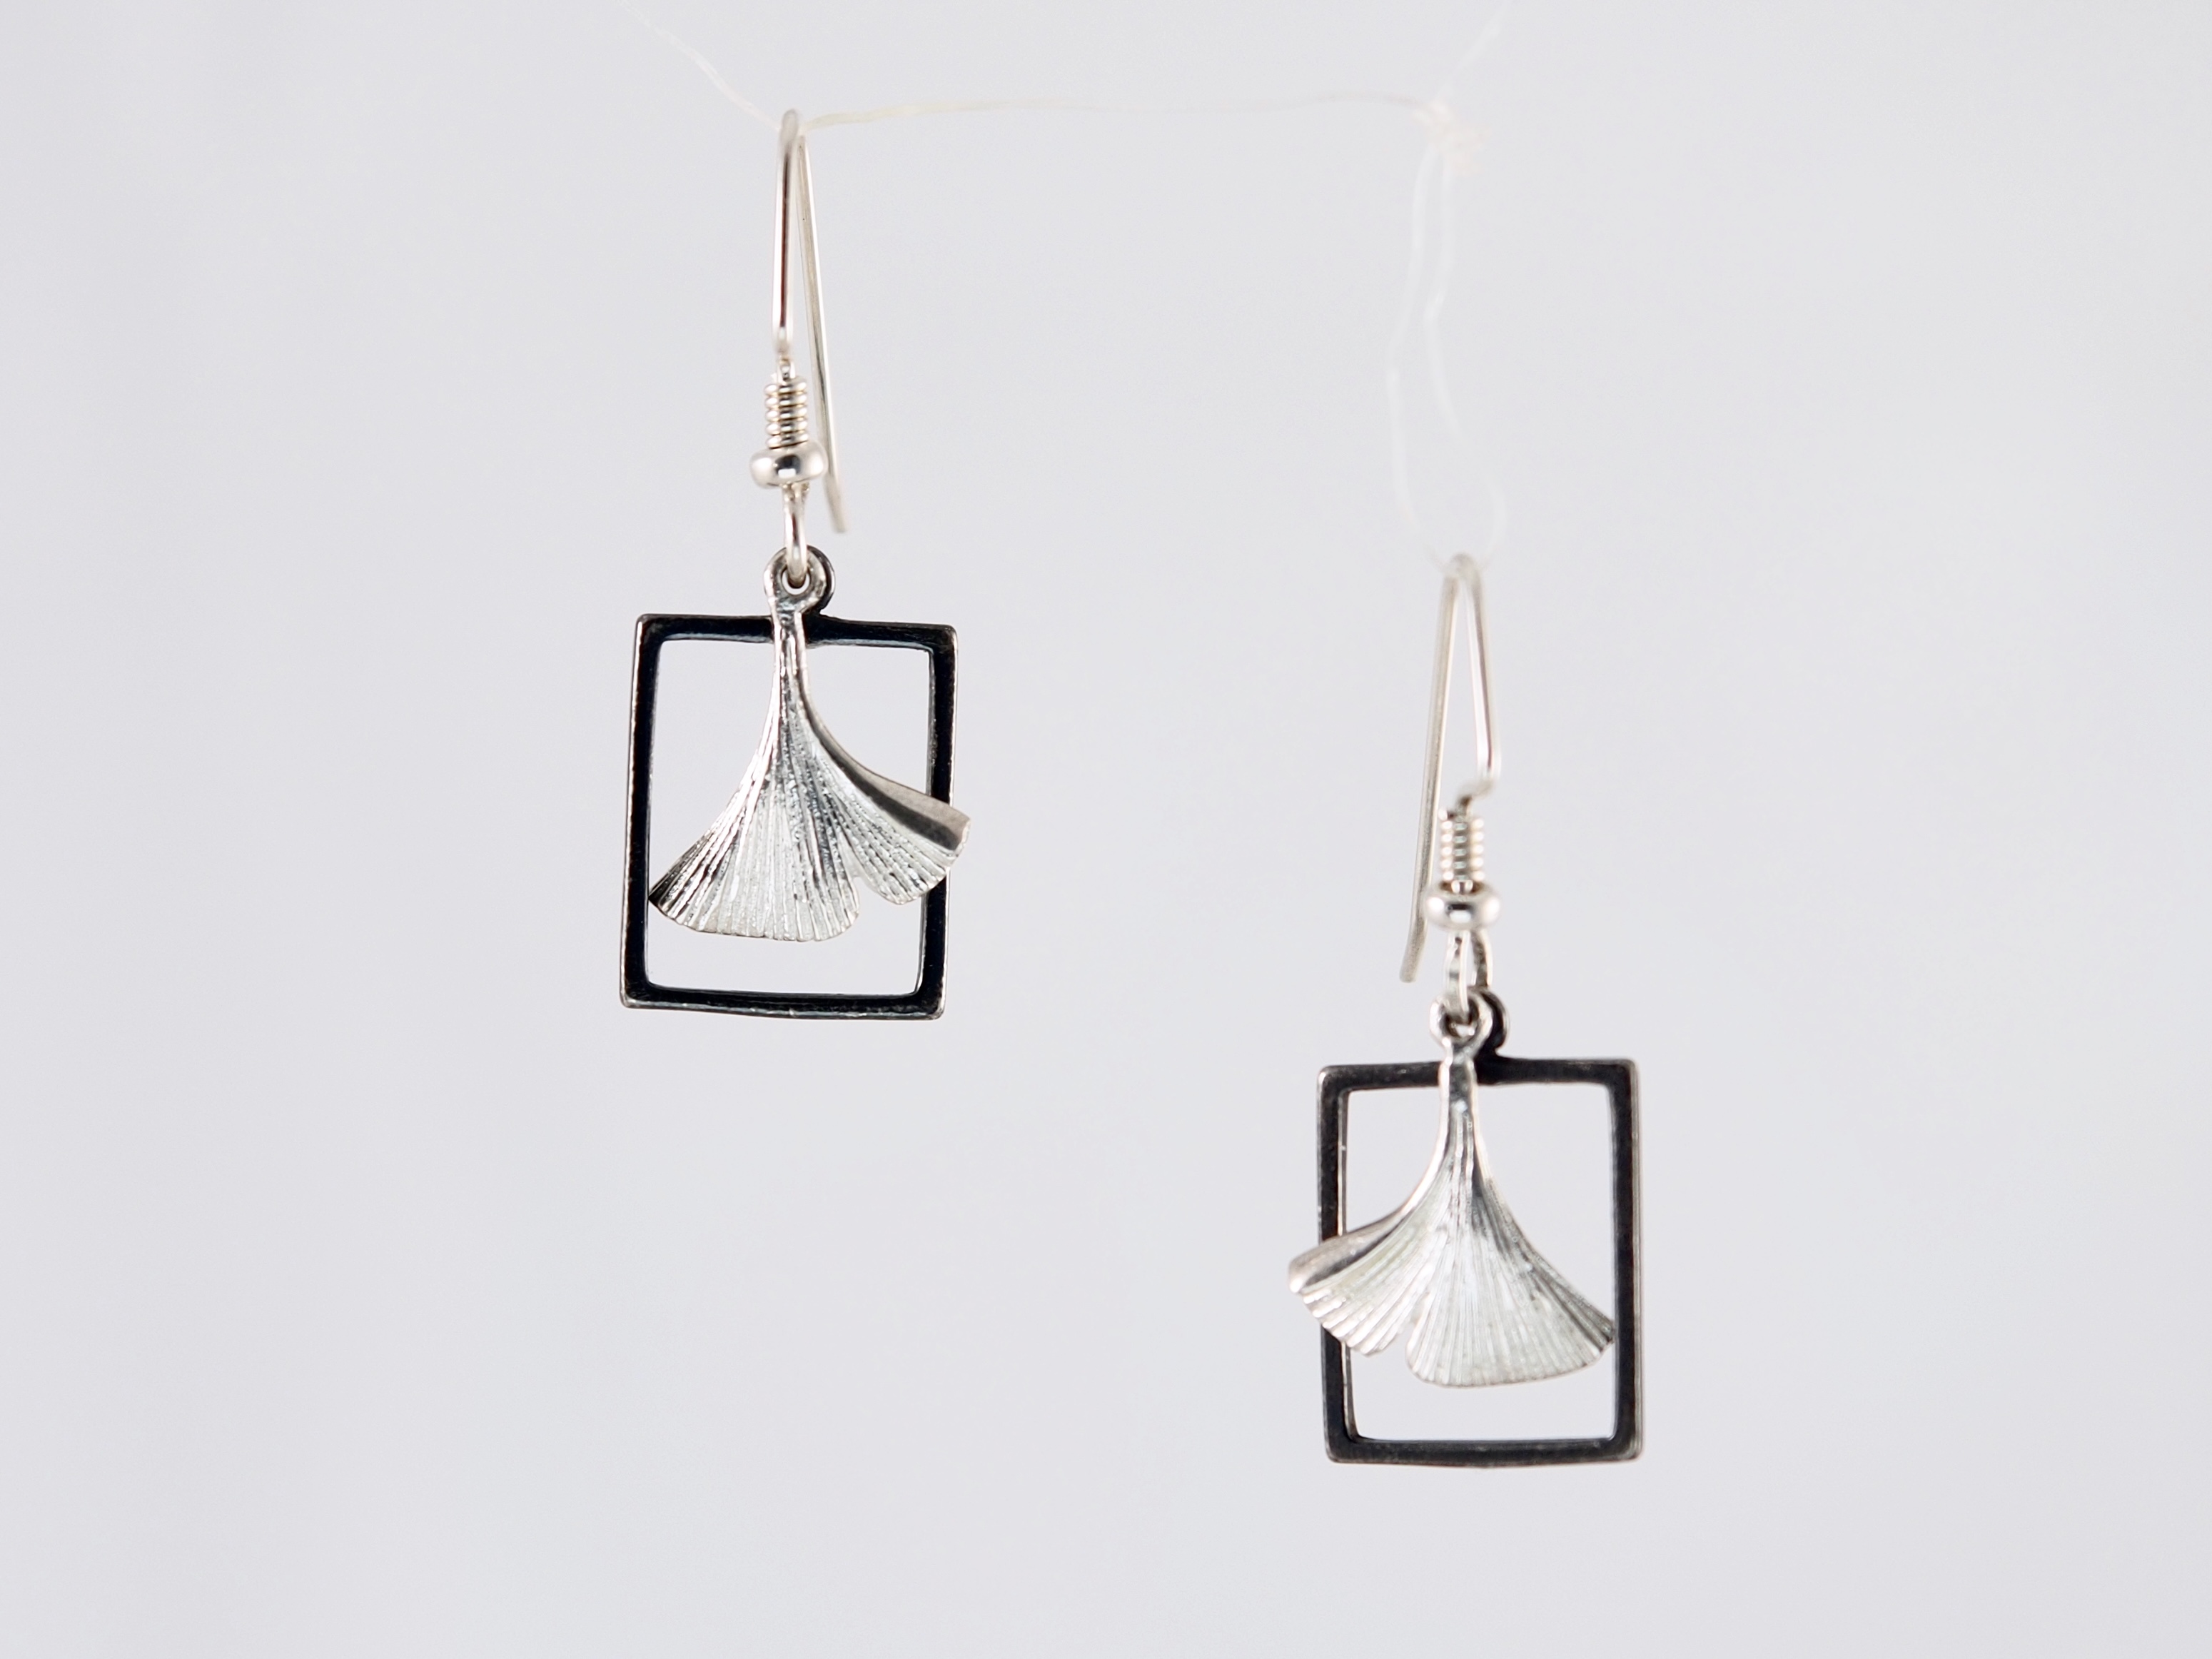 Oxidized Silver Frame on Sterling Gingko